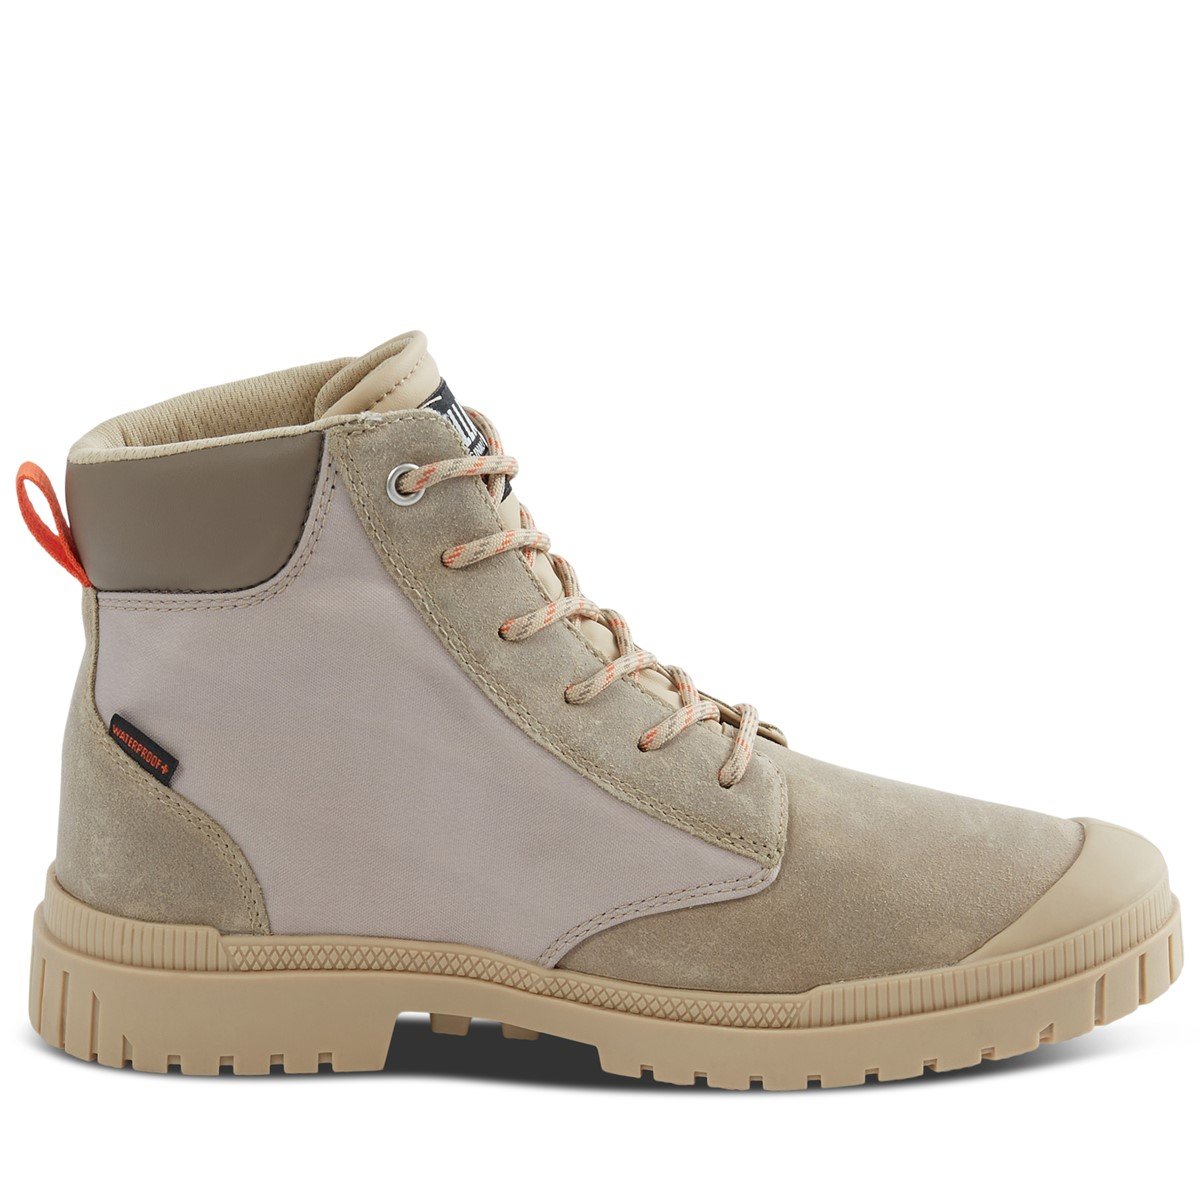 Women's Pampa SP20 Lace-Up Boots in Beige